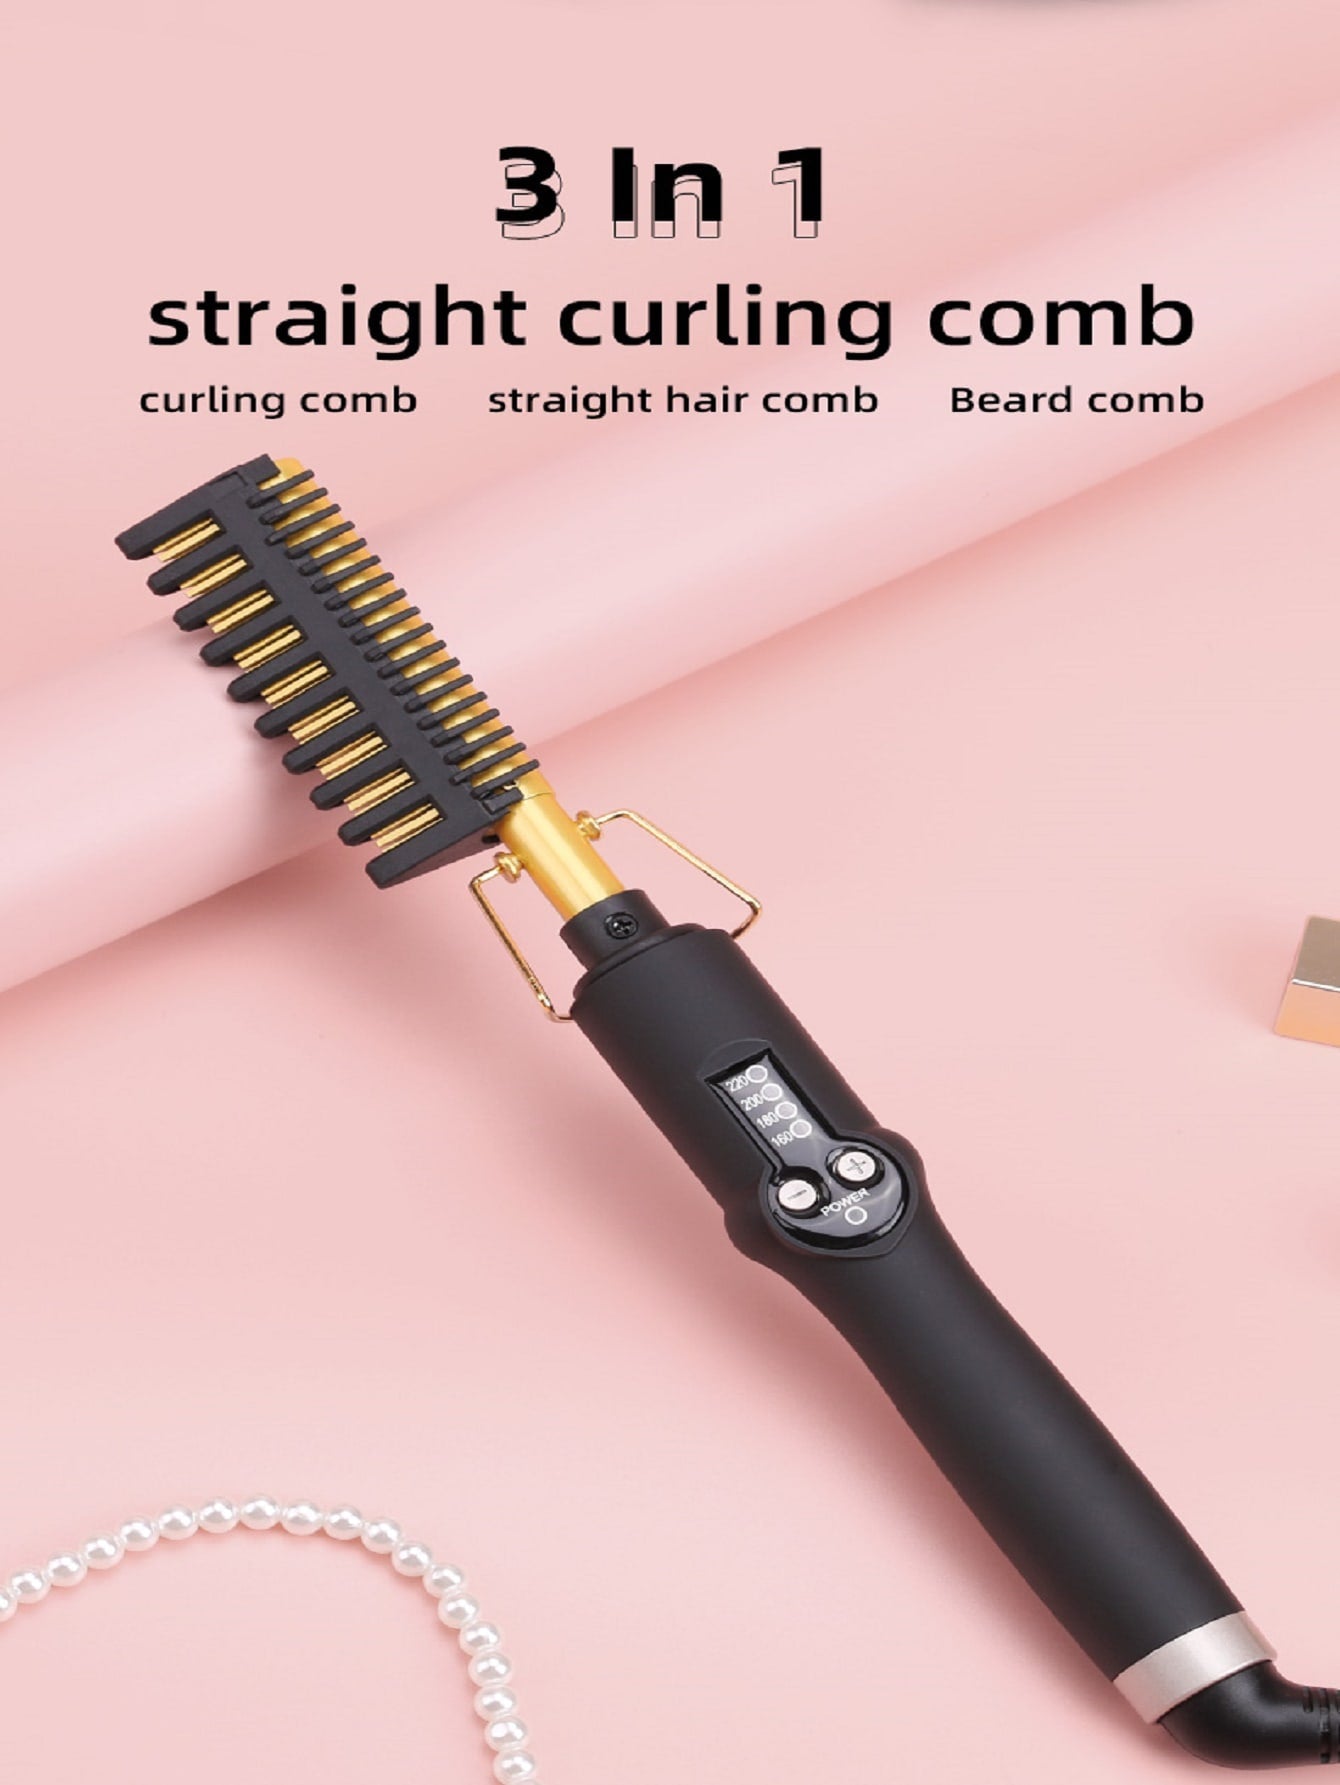 Electric Hair Comb, Professional High Temperature Ceramic Styling Comb, Multifunctional Copper Straightener Curler Straightening Comb-Black-1